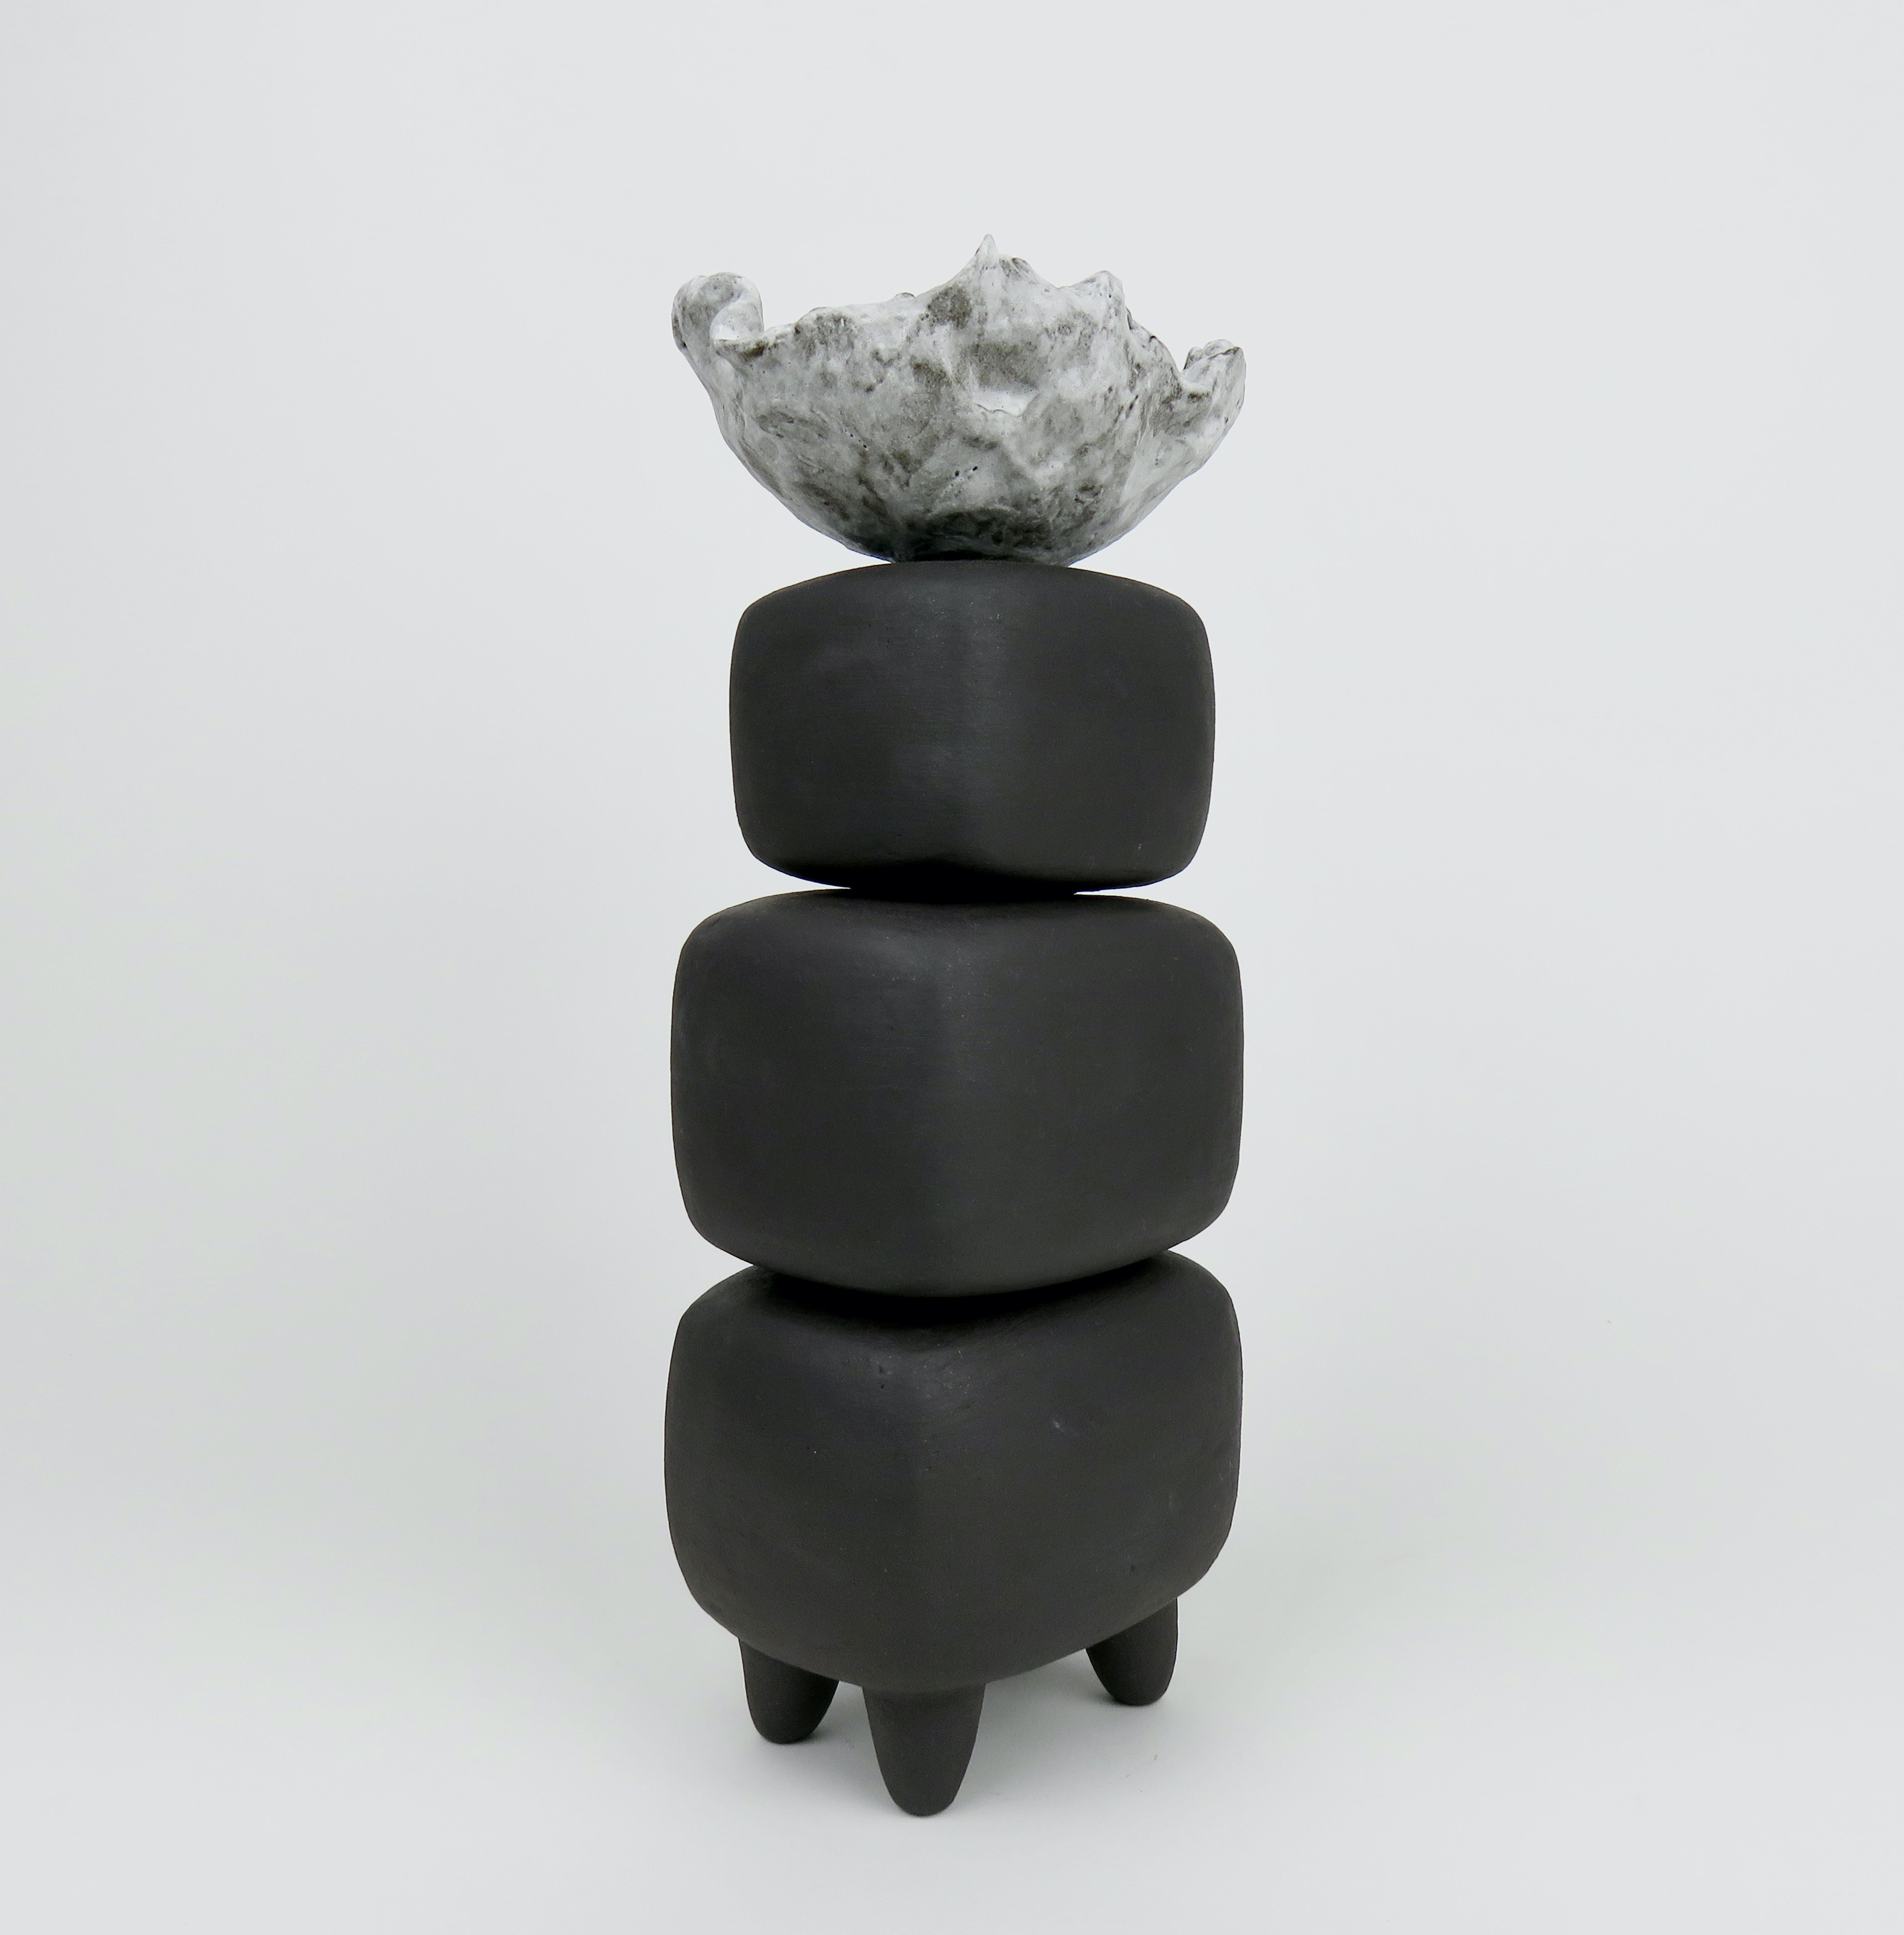 Organic Modern Hand Built Ceramic Sculpture, Dark Brown Stacked Cubes with White Crinkled Top